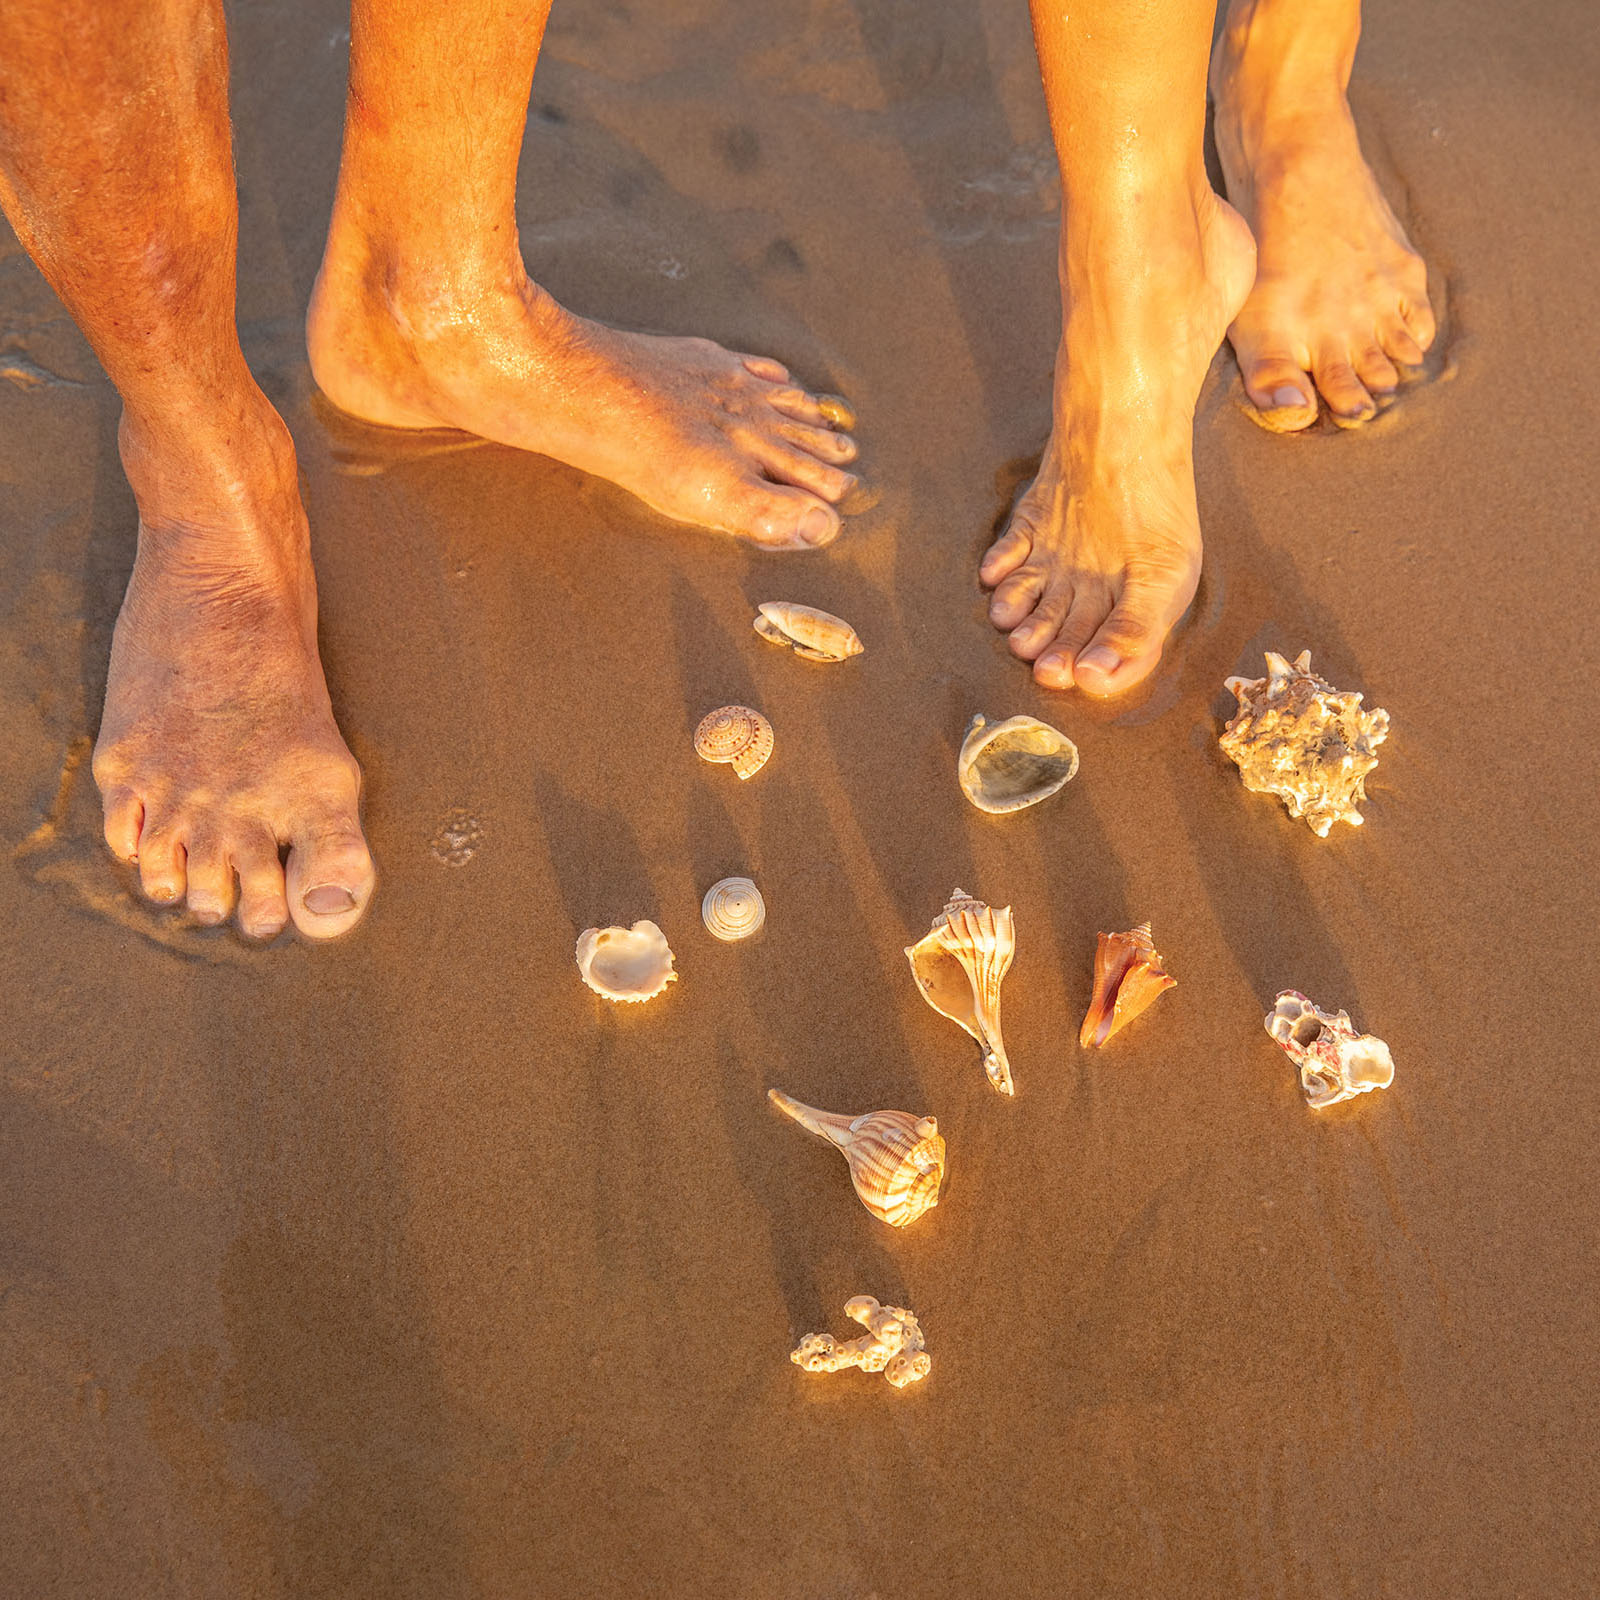 Two pair of bare feet next to a collection of shells in the sand